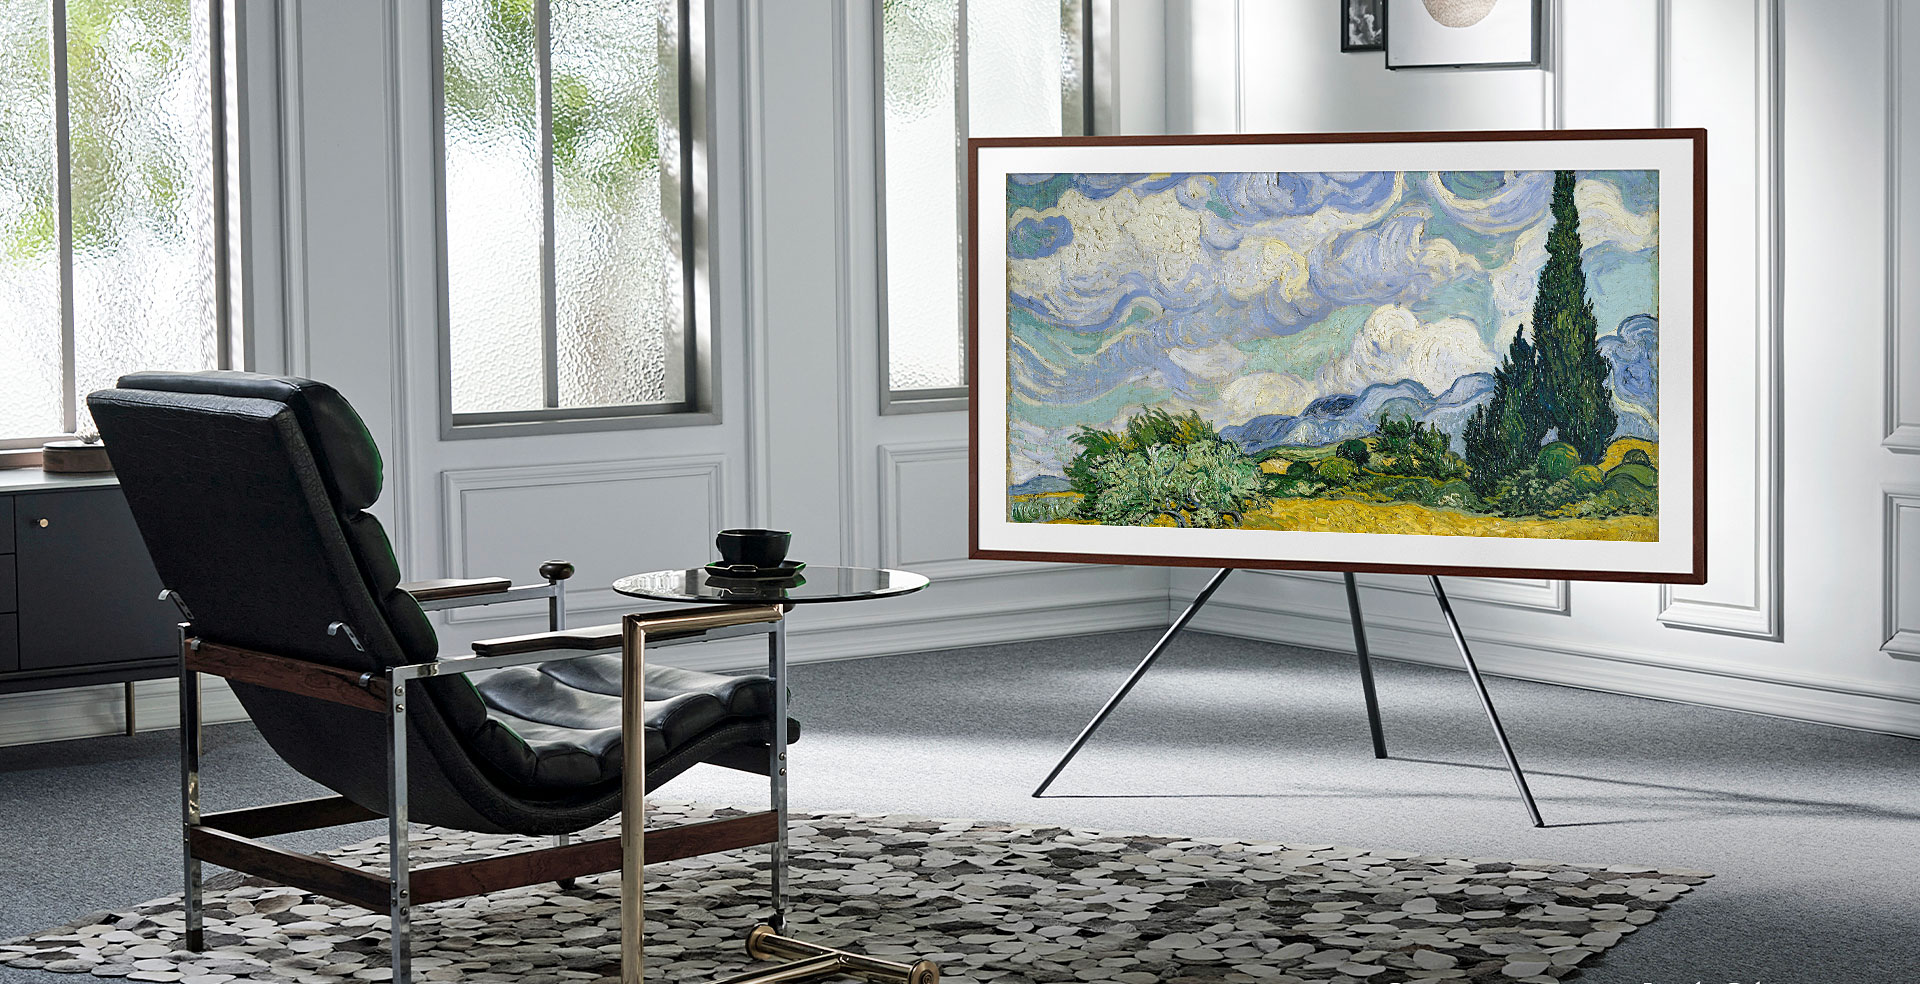 Why Samsung The Frame TV 2020 Should Be in Every Interior Lover's